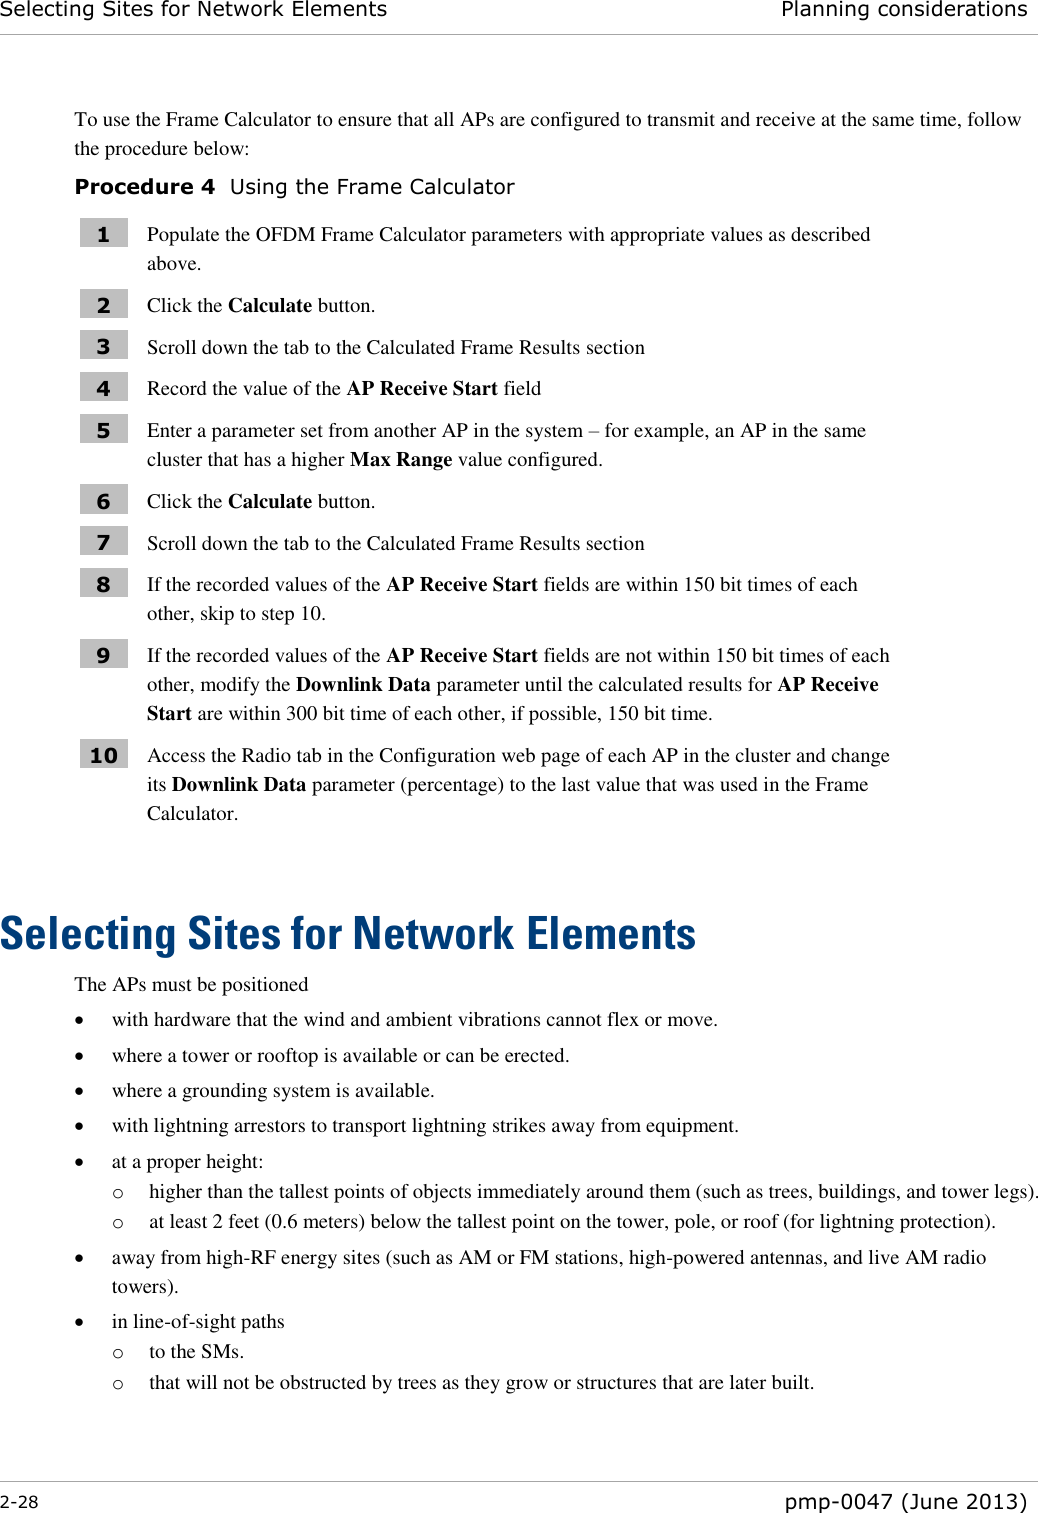 Selecting Sites for Network Elements Planning considerations  2-28  pmp-0047 (June 2013)  To use the Frame Calculator to ensure that all APs are configured to transmit and receive at the same time, follow the procedure below: Procedure 4  Using the Frame Calculator 1 Populate the OFDM Frame Calculator parameters with appropriate values as described above. 2 Click the Calculate button. 3 Scroll down the tab to the Calculated Frame Results section 4 Record the value of the AP Receive Start field 5 Enter a parameter set from another AP in the system – for example, an AP in the same cluster that has a higher Max Range value configured. 6 Click the Calculate button. 7 Scroll down the tab to the Calculated Frame Results section 8 If the recorded values of the AP Receive Start fields are within 150 bit times of each other, skip to step 10. 9 If the recorded values of the AP Receive Start fields are not within 150 bit times of each other, modify the Downlink Data parameter until the calculated results for AP Receive Start are within 300 bit time of each other, if possible, 150 bit time. 10 Access the Radio tab in the Configuration web page of each AP in the cluster and change its Downlink Data parameter (percentage) to the last value that was used in the Frame Calculator.  Selecting Sites for Network Elements The APs must be positioned  with hardware that the wind and ambient vibrations cannot flex or move.  where a tower or rooftop is available or can be erected.  where a grounding system is available.  with lightning arrestors to transport lightning strikes away from equipment.  at a proper height: o higher than the tallest points of objects immediately around them (such as trees, buildings, and tower legs).  o at least 2 feet (0.6 meters) below the tallest point on the tower, pole, or roof (for lightning protection).  away from high-RF energy sites (such as AM or FM stations, high-powered antennas, and live AM radio towers).  in line-of-sight paths o to the SMs. o that will not be obstructed by trees as they grow or structures that are later built.  